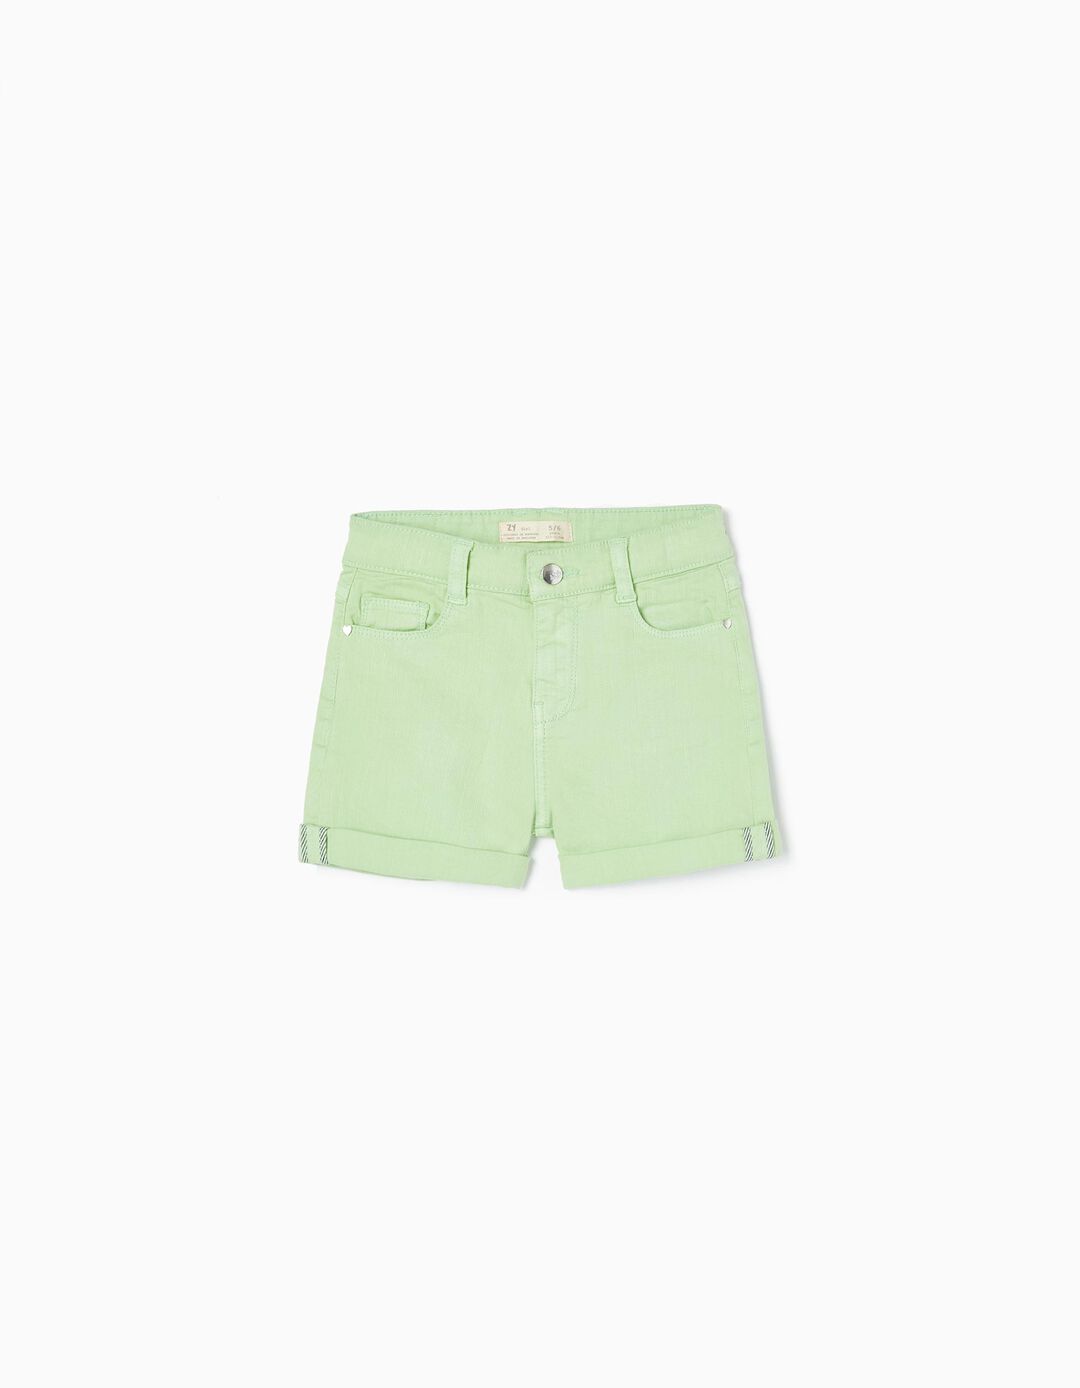 Cotton Twill Shorts for Girls, Green